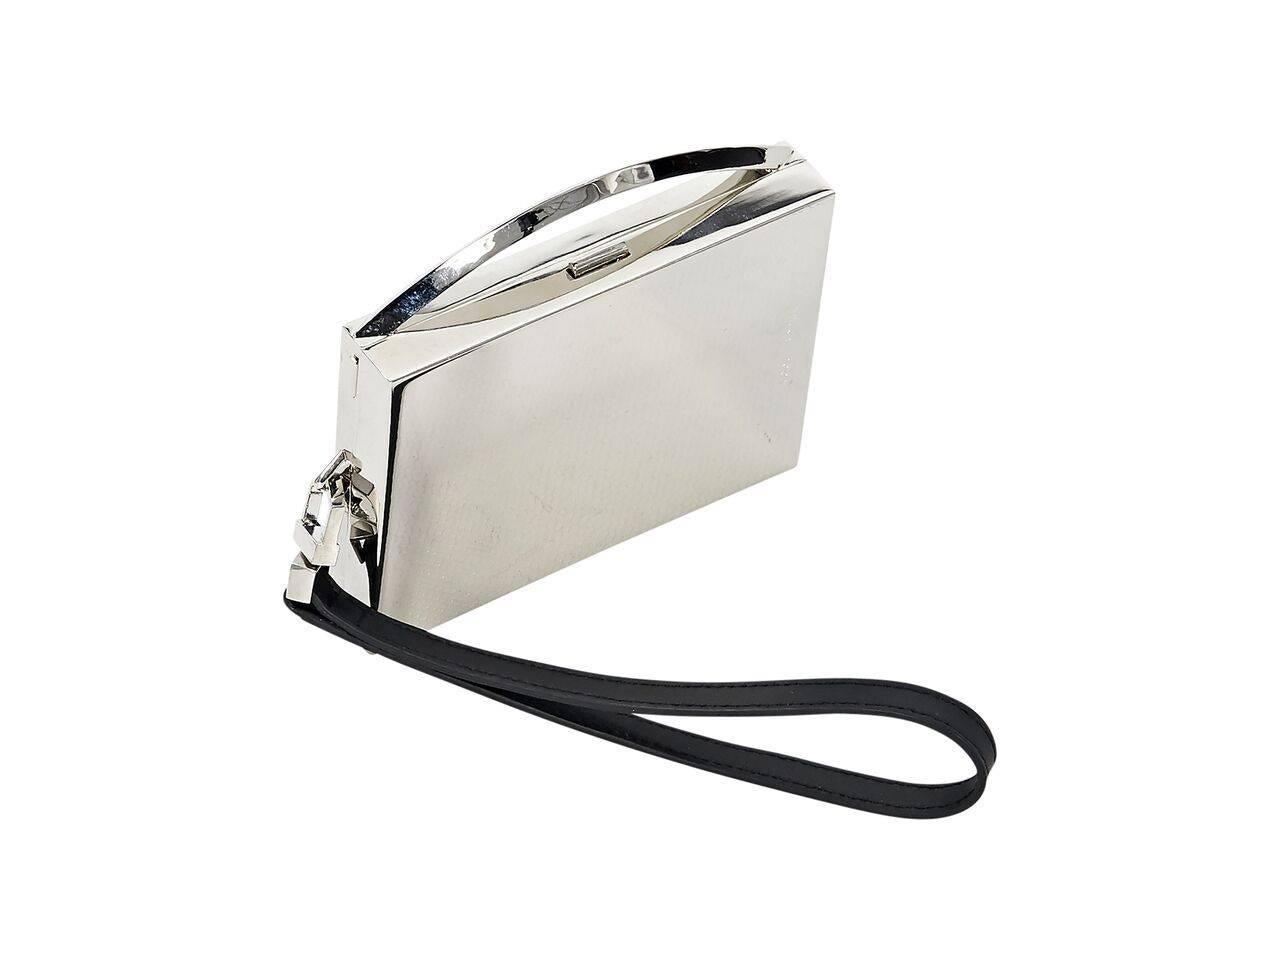 Product details:  Sterling silver card wristlet by Eddie Borgo.  Detachable wristlet strap.  Top push-lock closure.  Dual inner compartments.  Original box included.  4